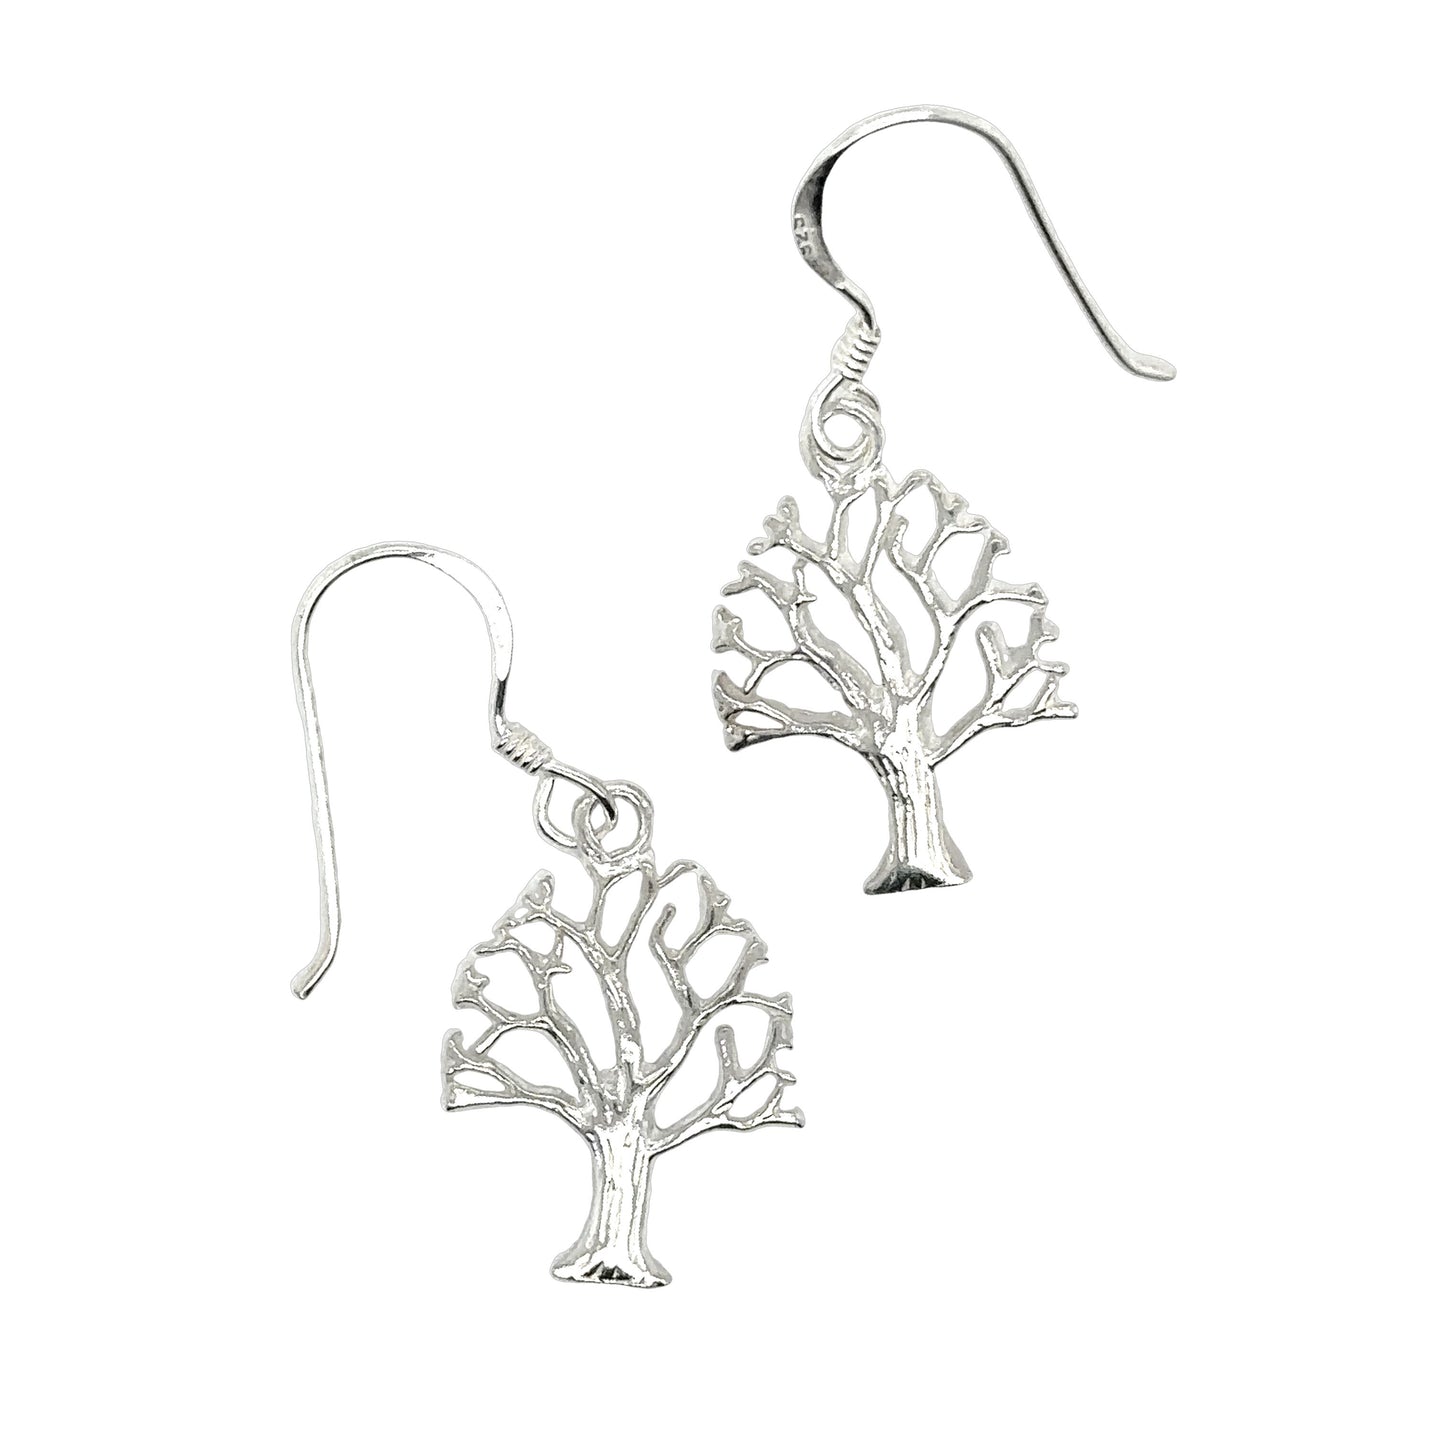 Super Silver's Tree Of Life Earrings are displayed on a white background.